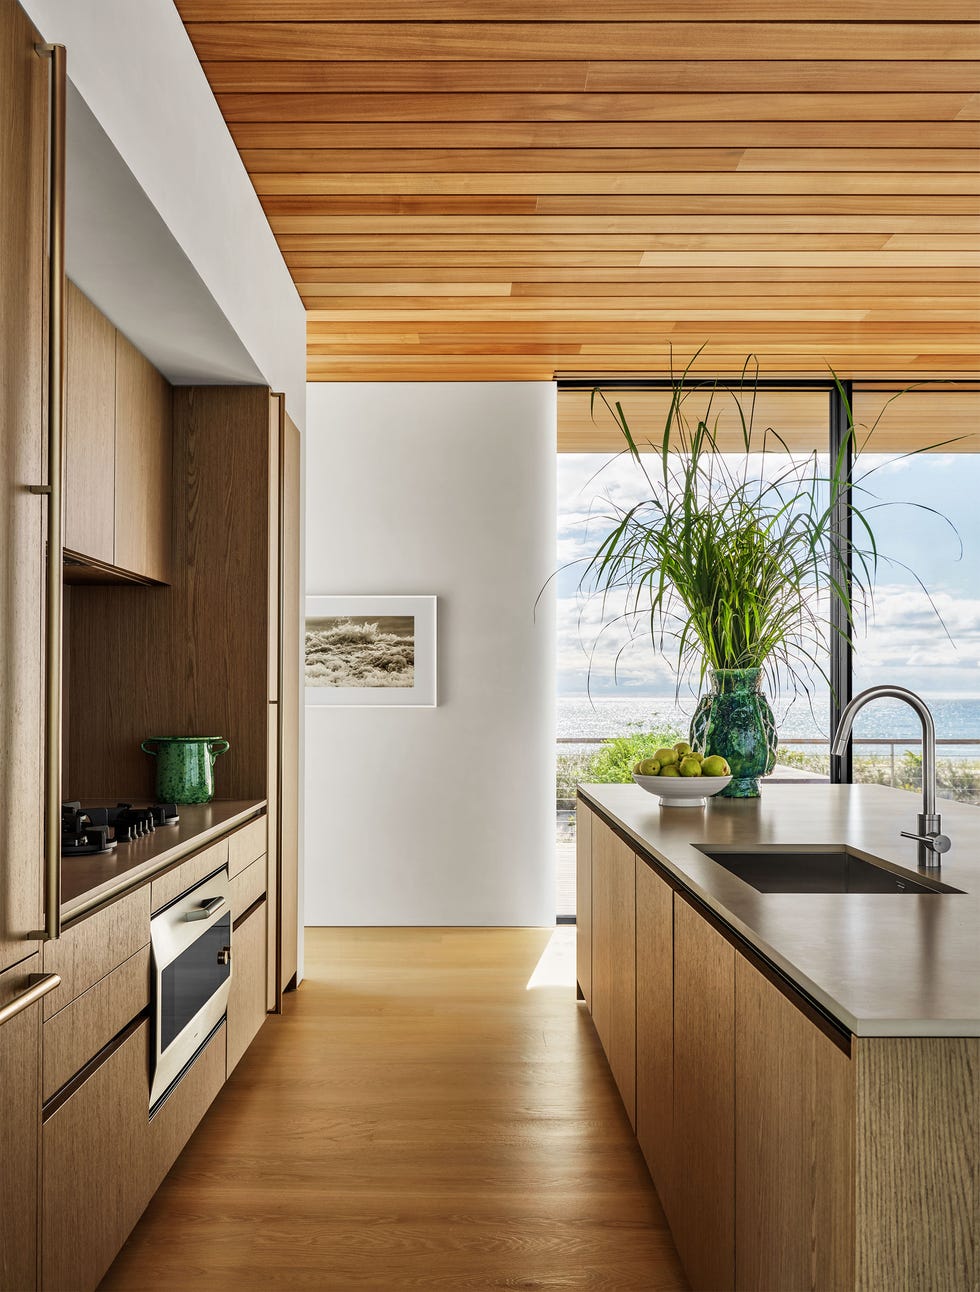 Kitchen with built-in stove and oven on wood counters and cabinets, kitchen island with sink and cabinets, wood floors, white walls with framed artwork, and glass walls with ocean views.